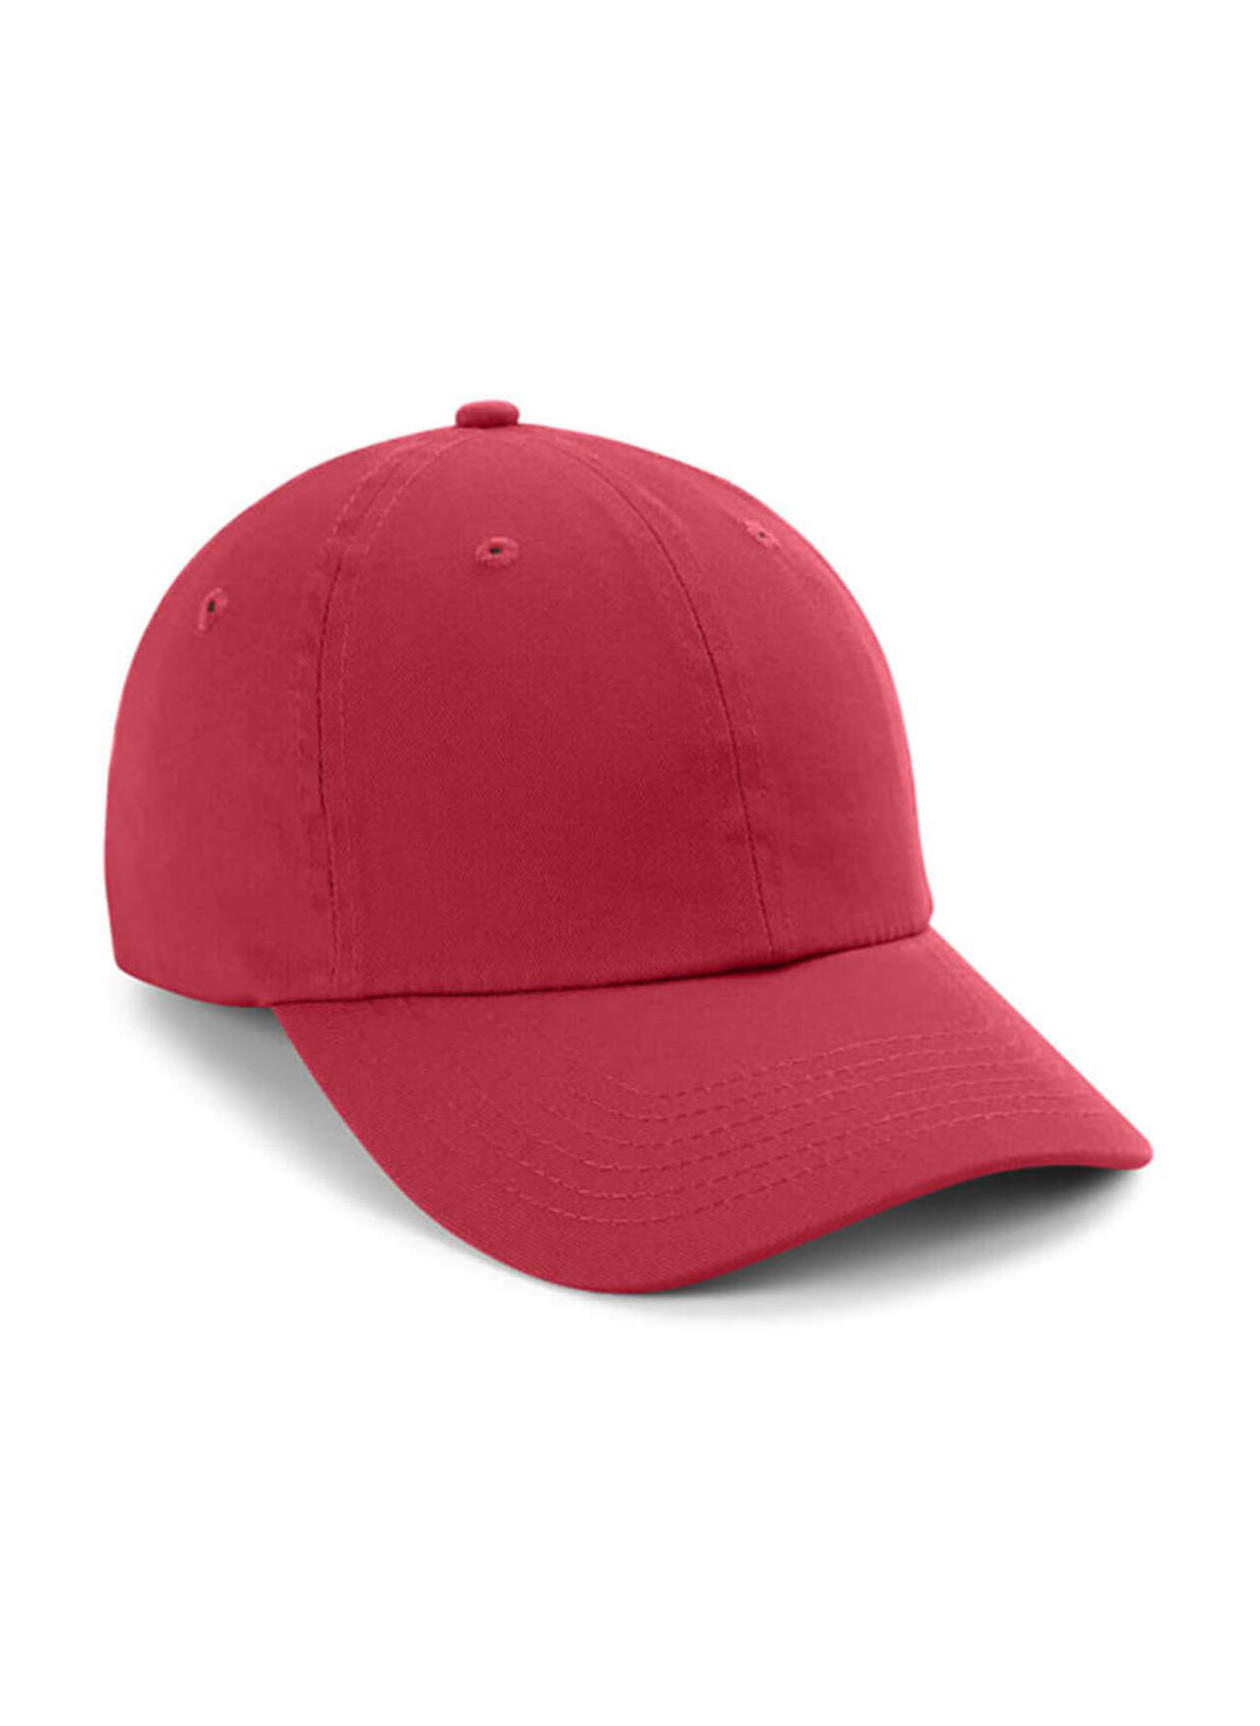 Imperial Nantucket Red The Original Buckle Hat